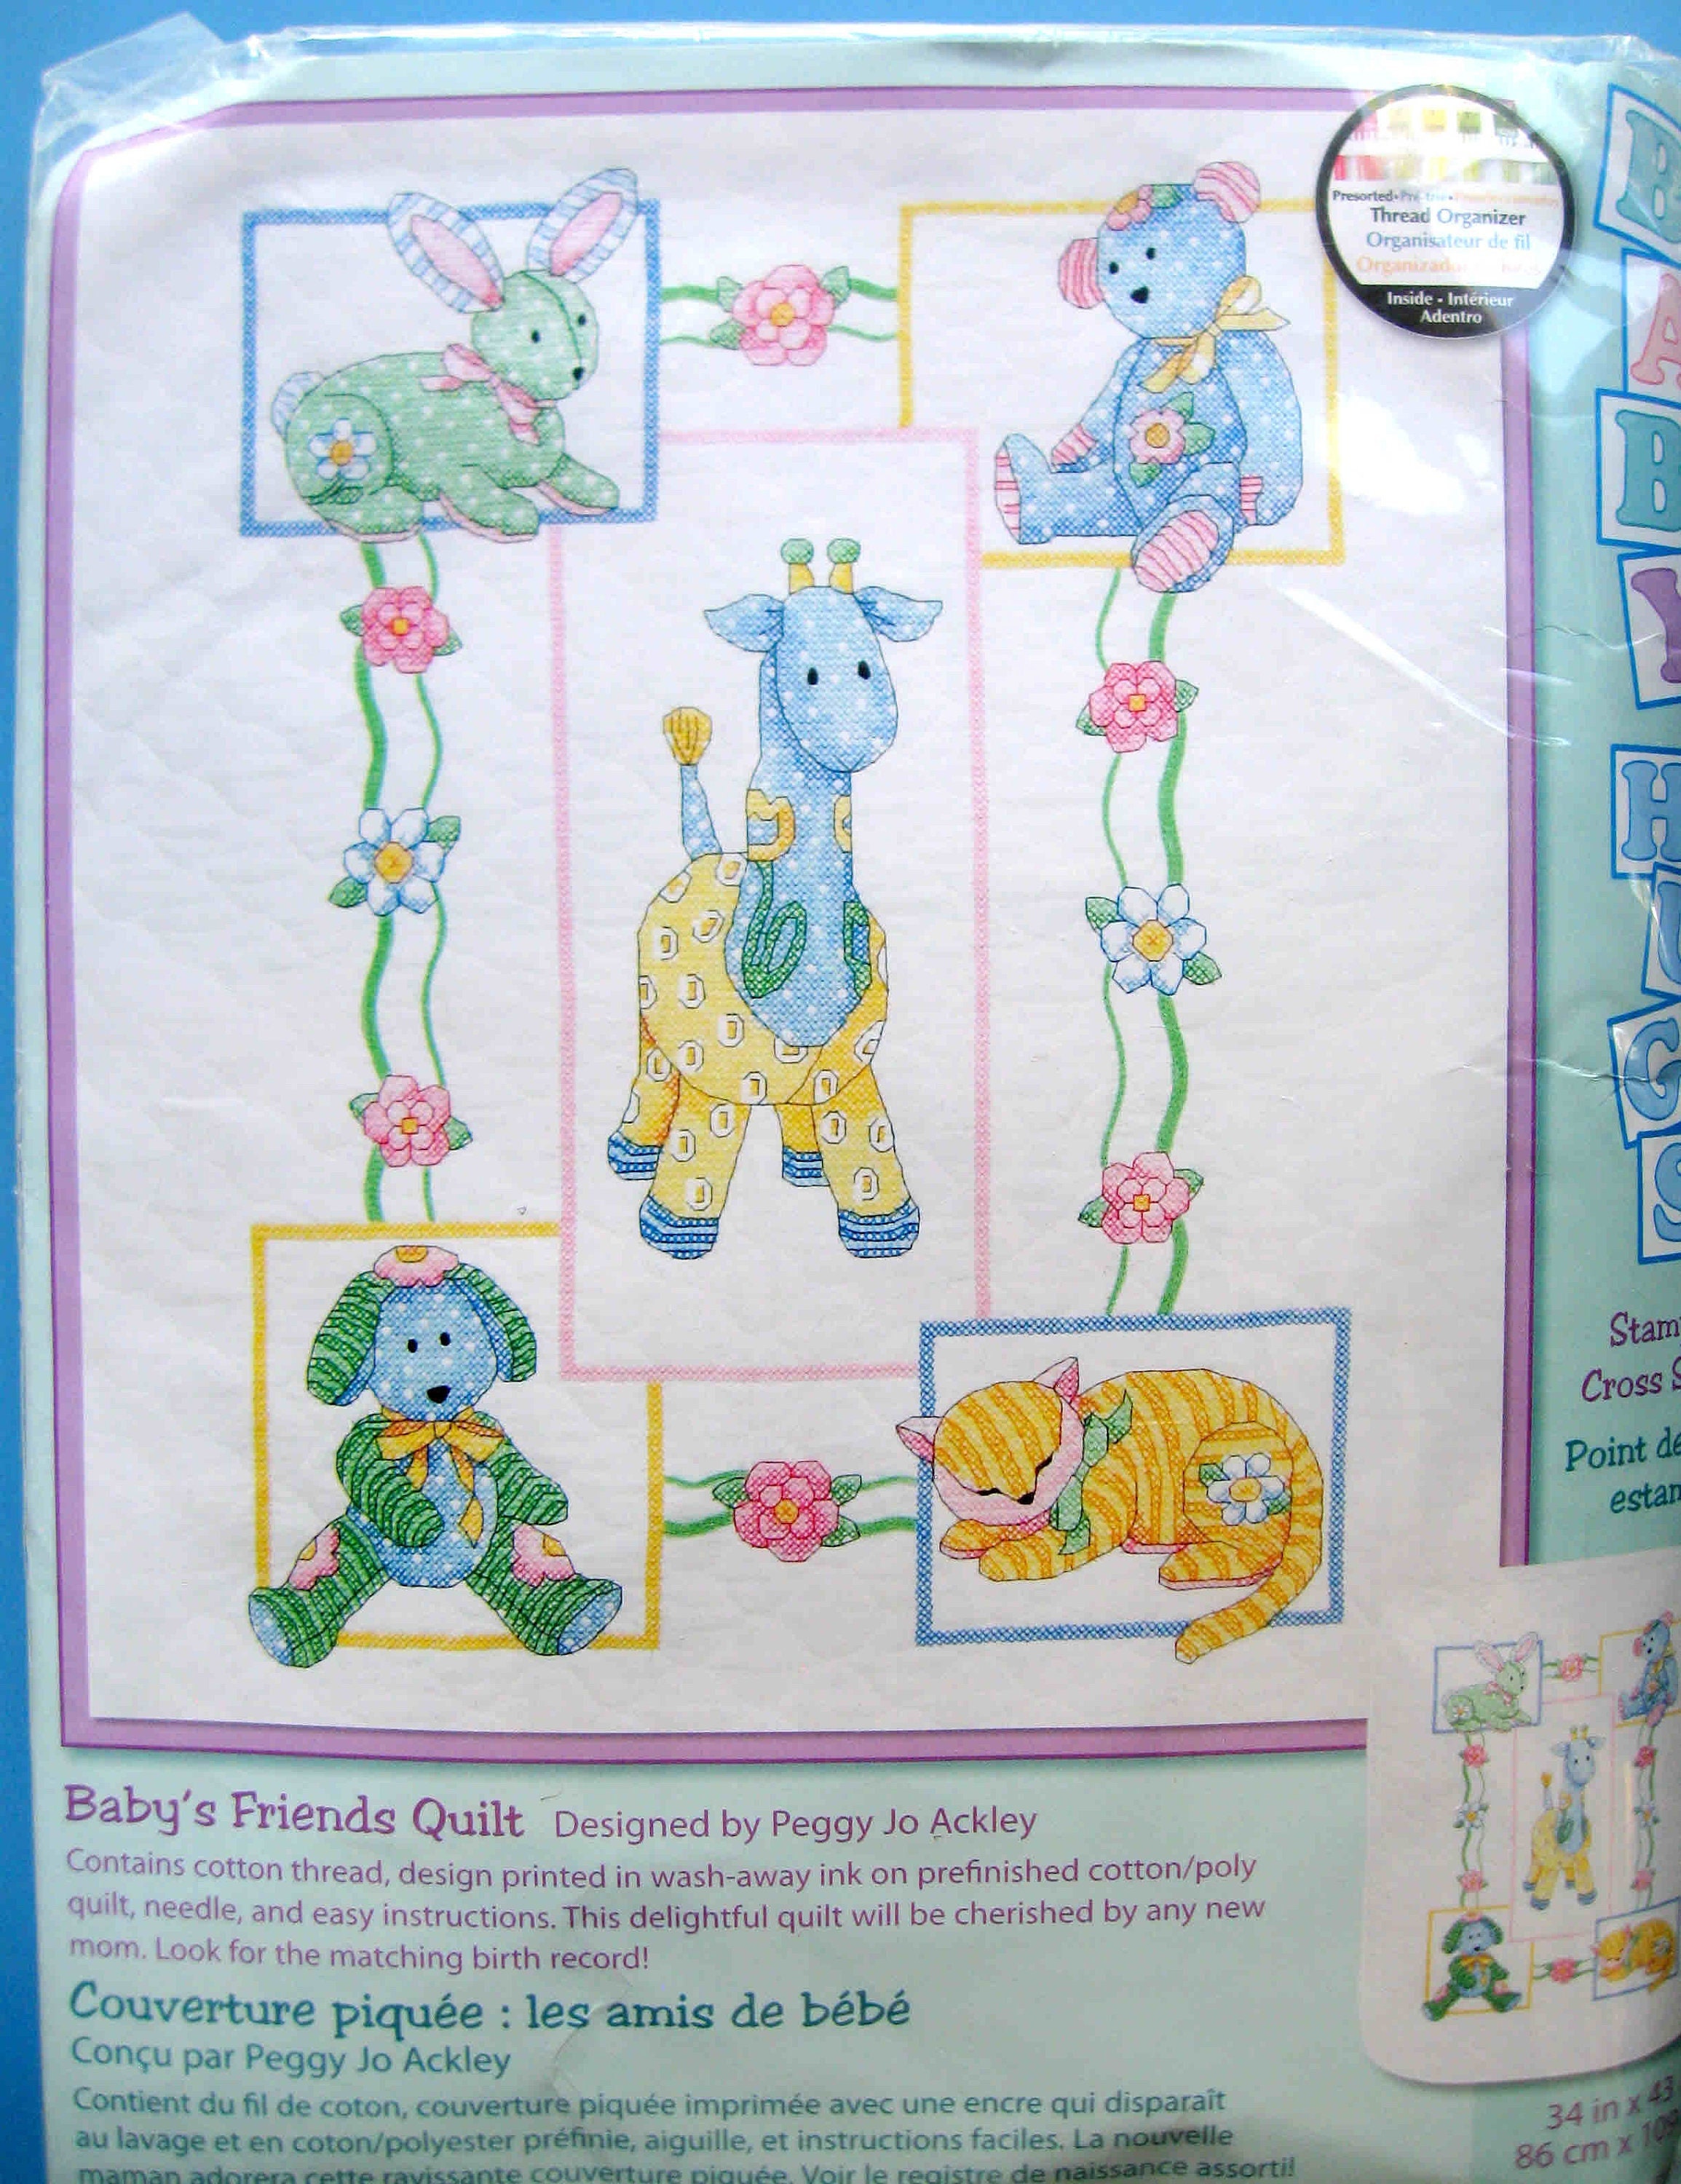 Giraffe and Friends Crib Quilt Top Stamped Cross Stitch Kit